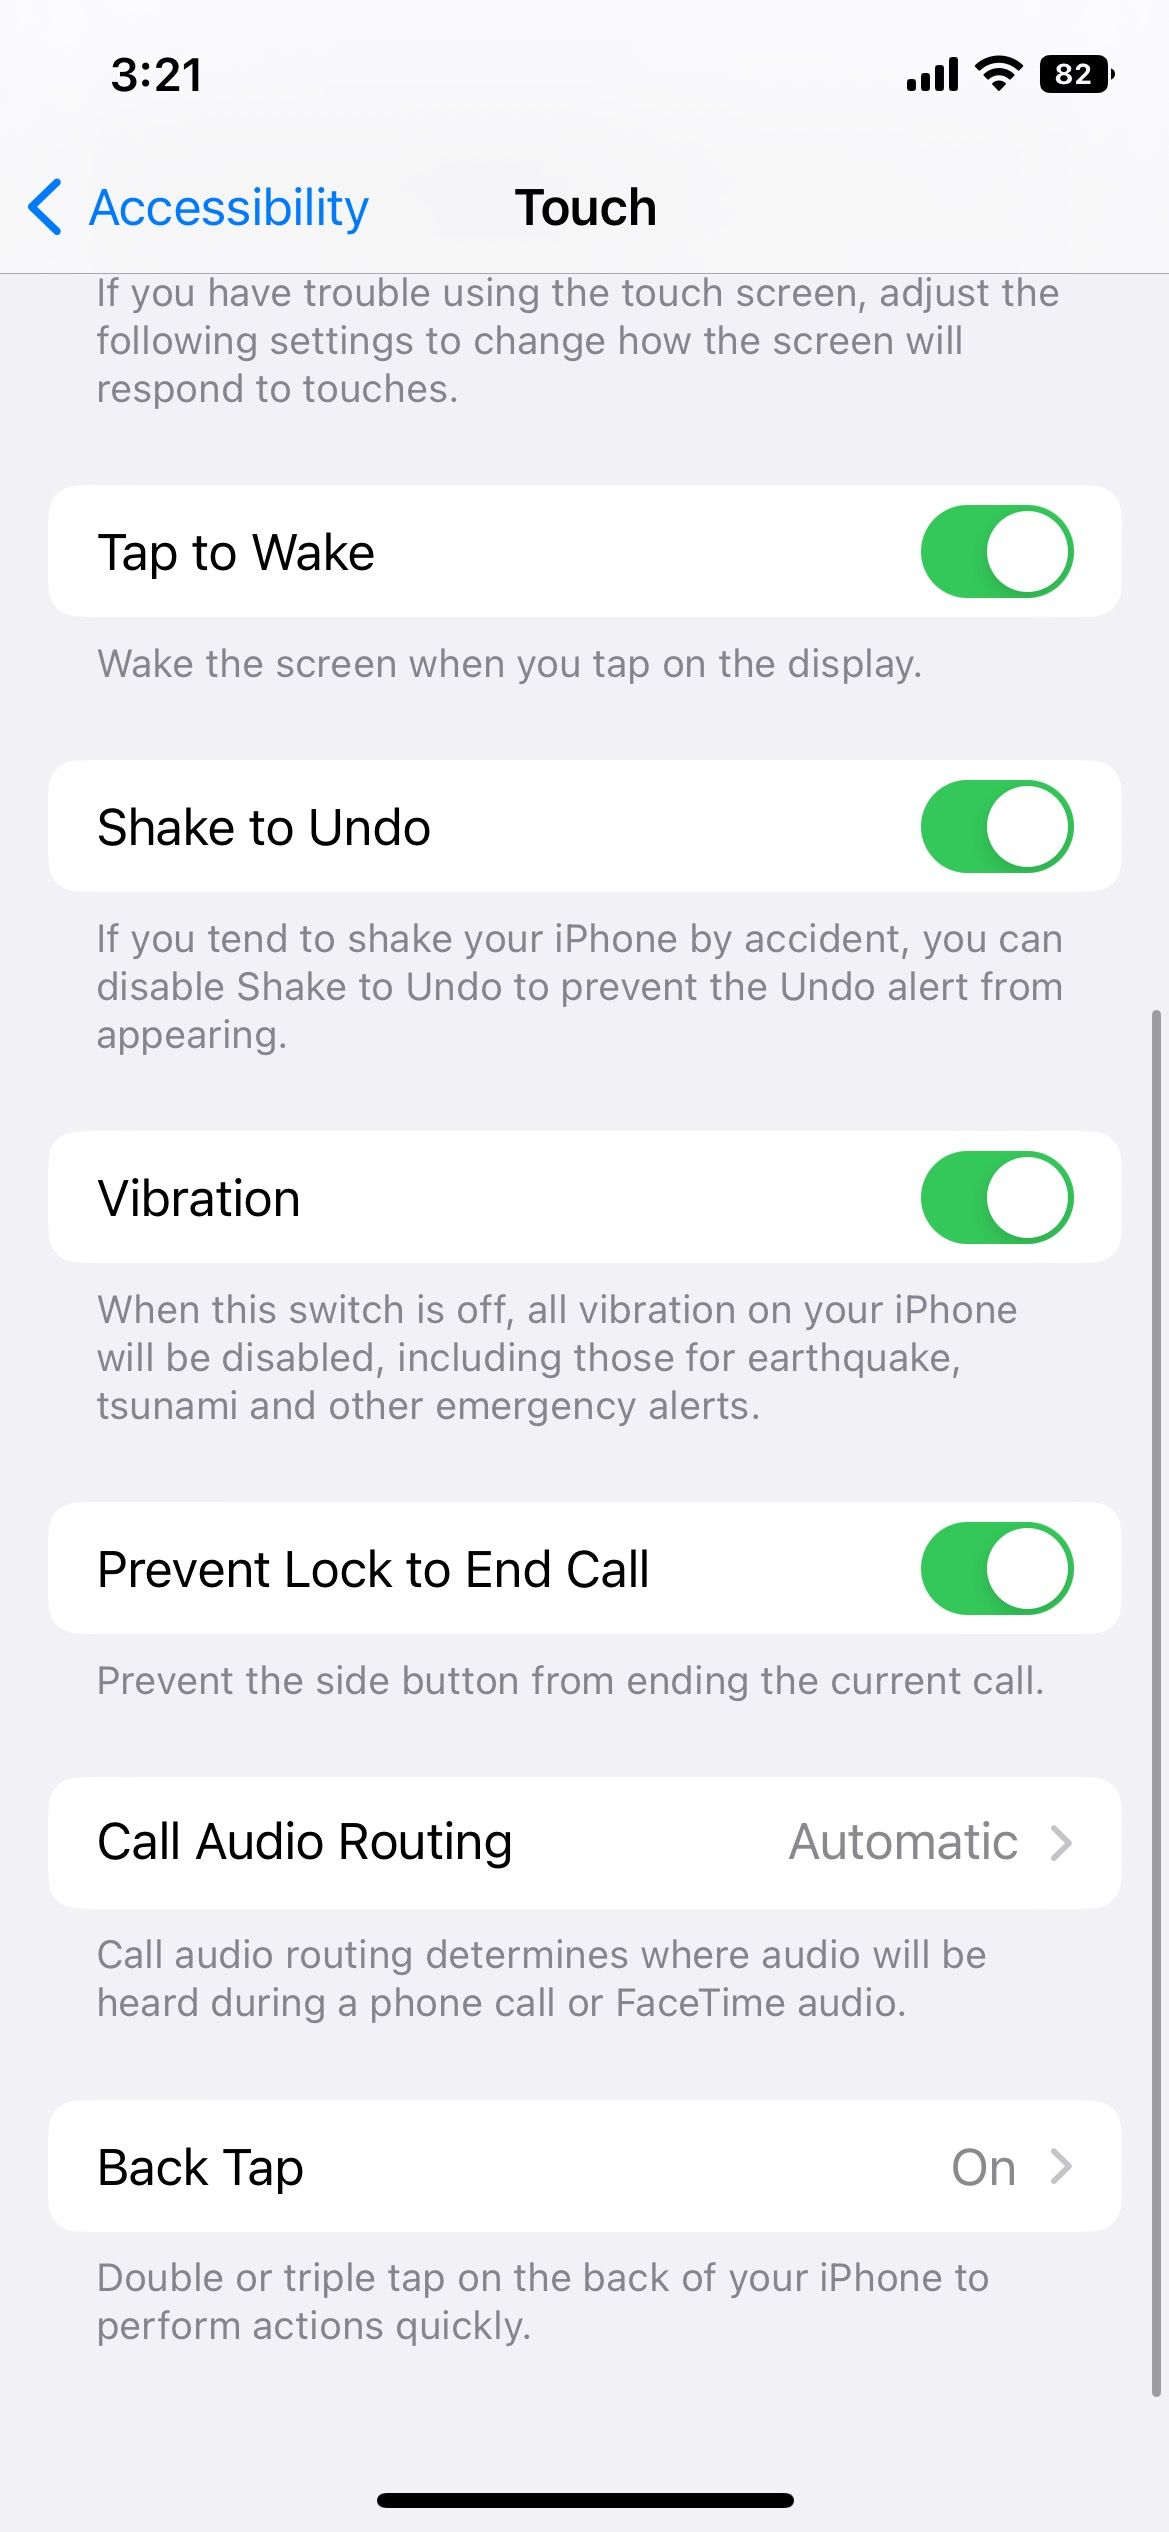 Prevent Lock to End Call feature